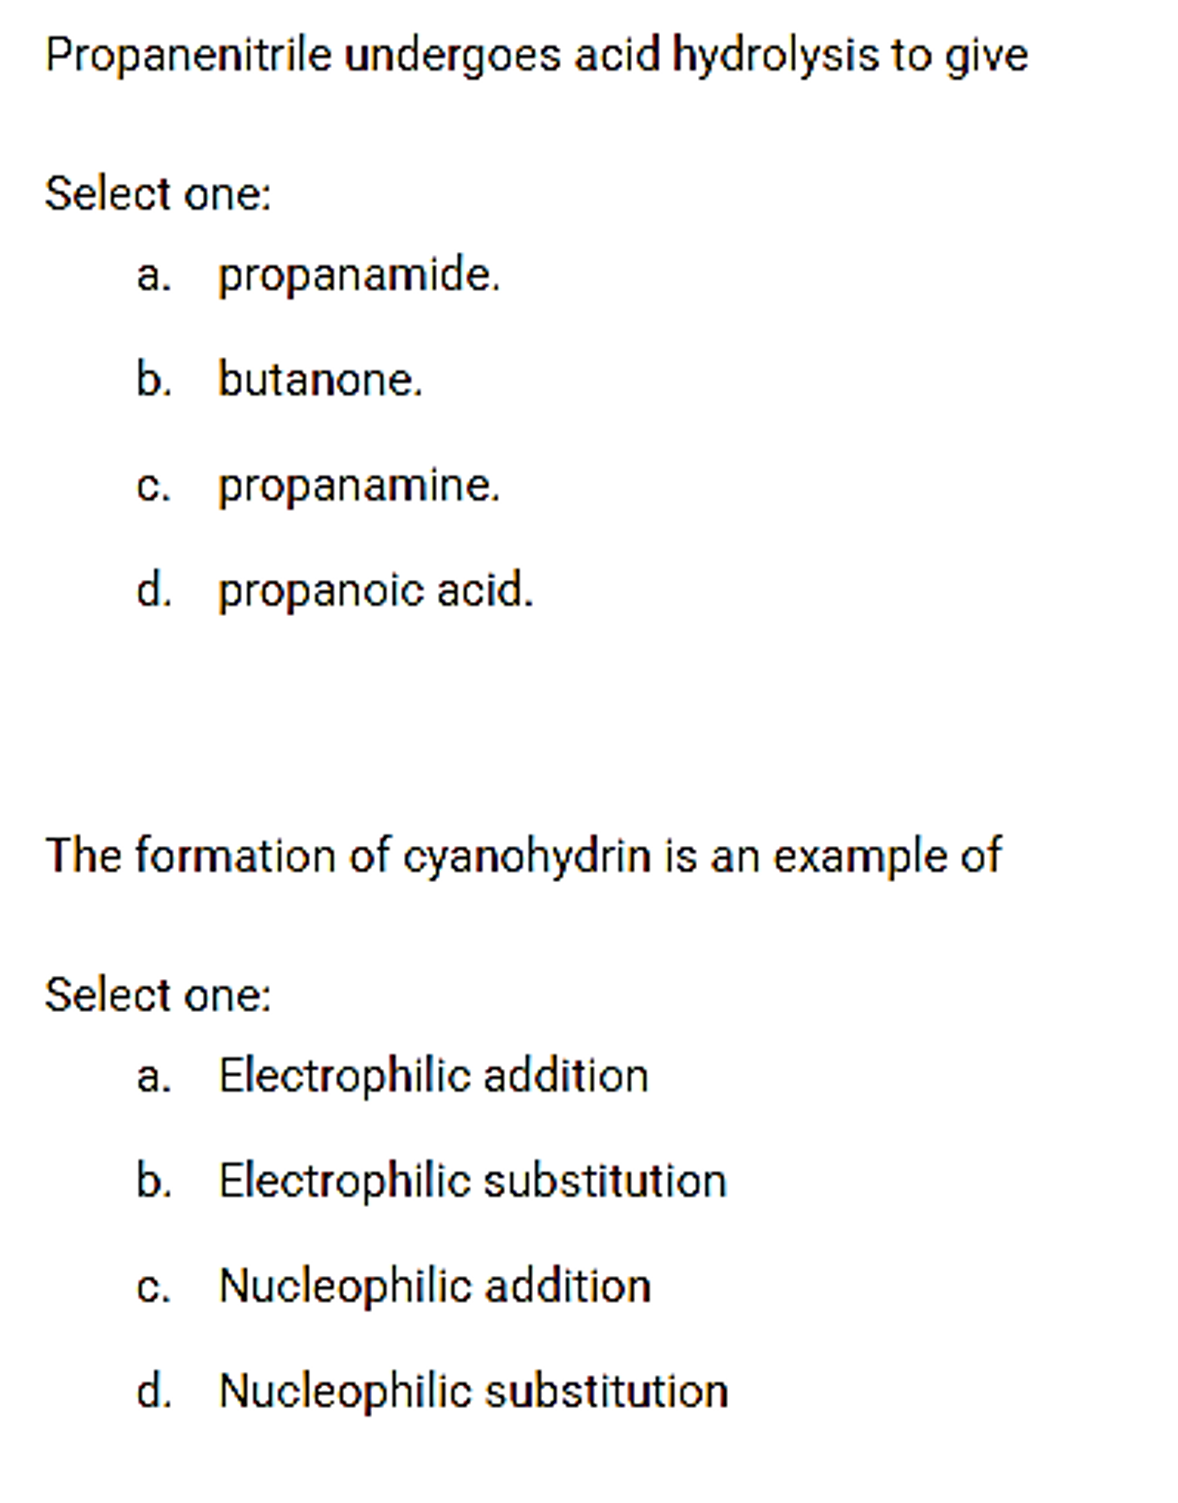 Propanenitrile undergoes acid hydrolysis to give
Select one:
a. propanamide.
b. butanone.
c.
propanamine.
d. propanoic acid.
The formation of cyanohydrin is an example of
Select one:
a. Electrophilic addition
b. Electrophilic substitution
c. Nucleophilic addition
d. Nucleophilic substitution